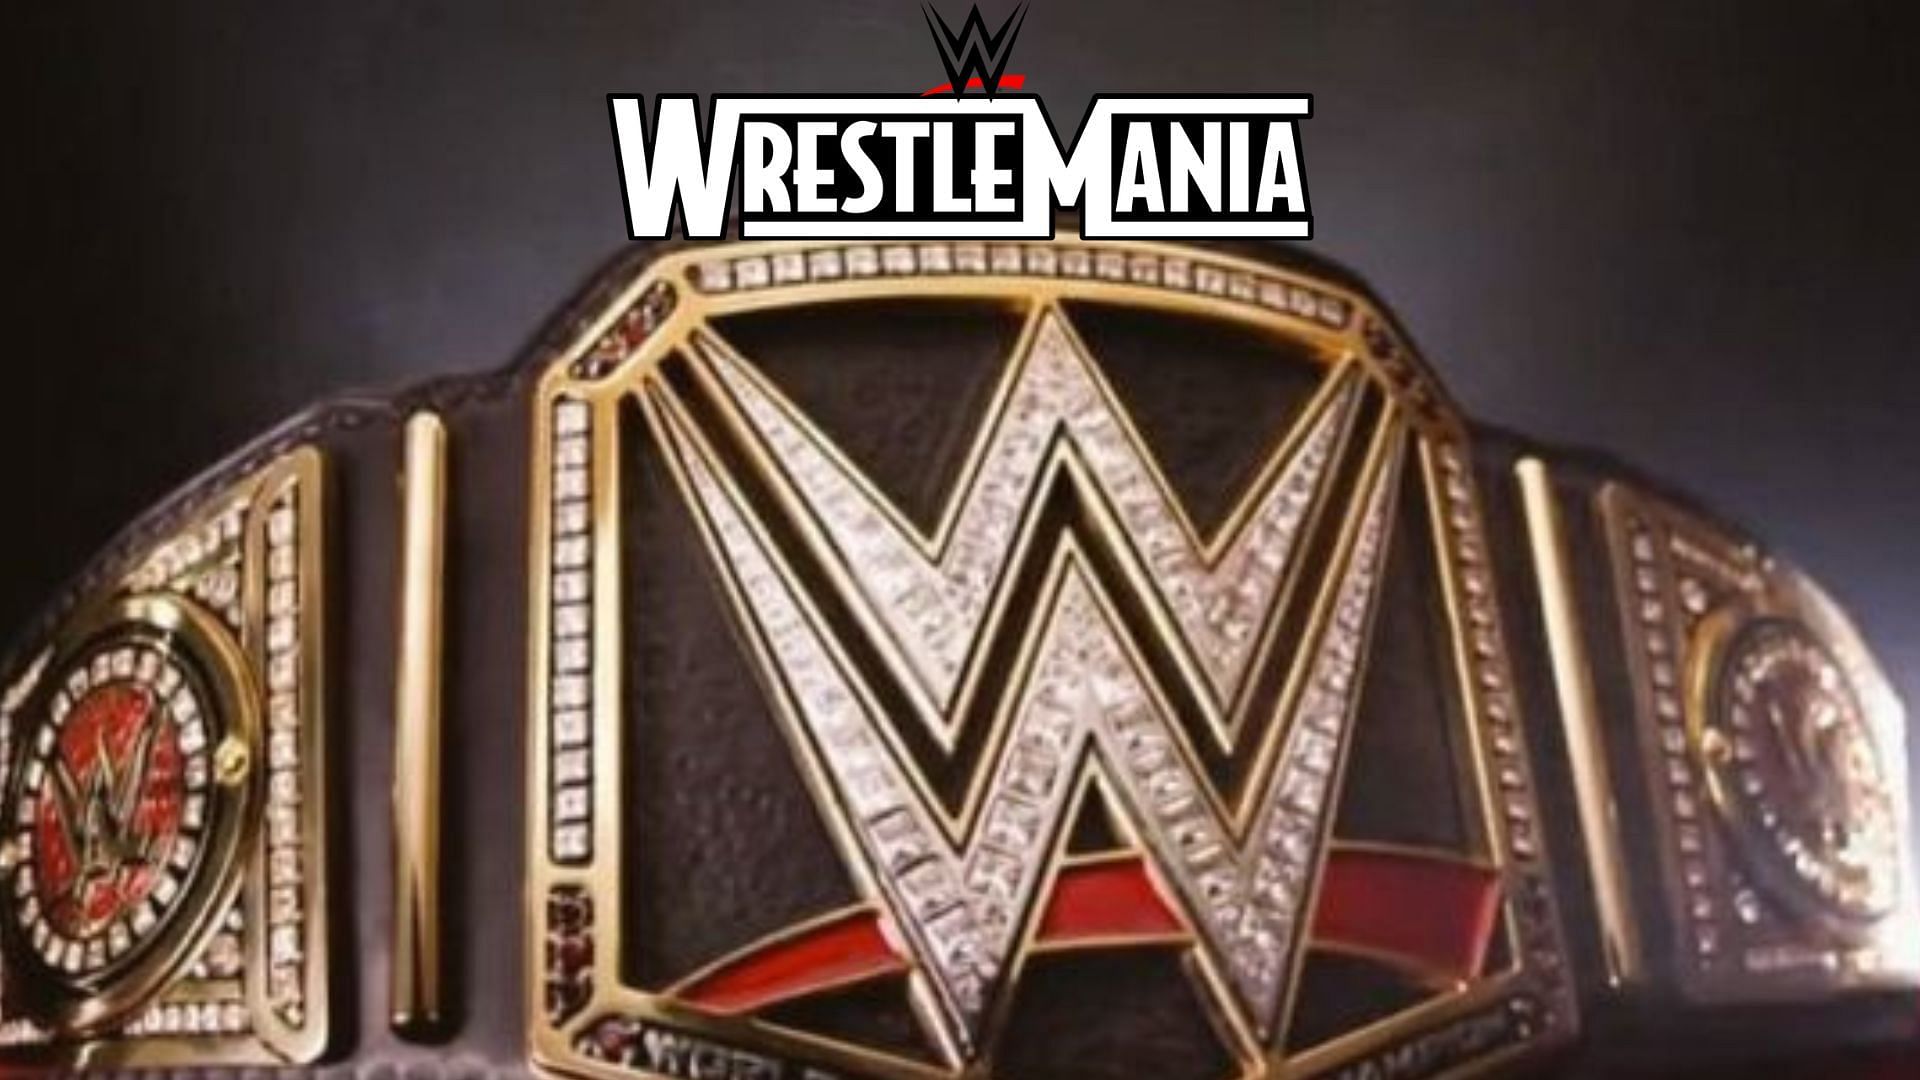 Which WWE Champion had some strange plans ahead after WrestleMania?